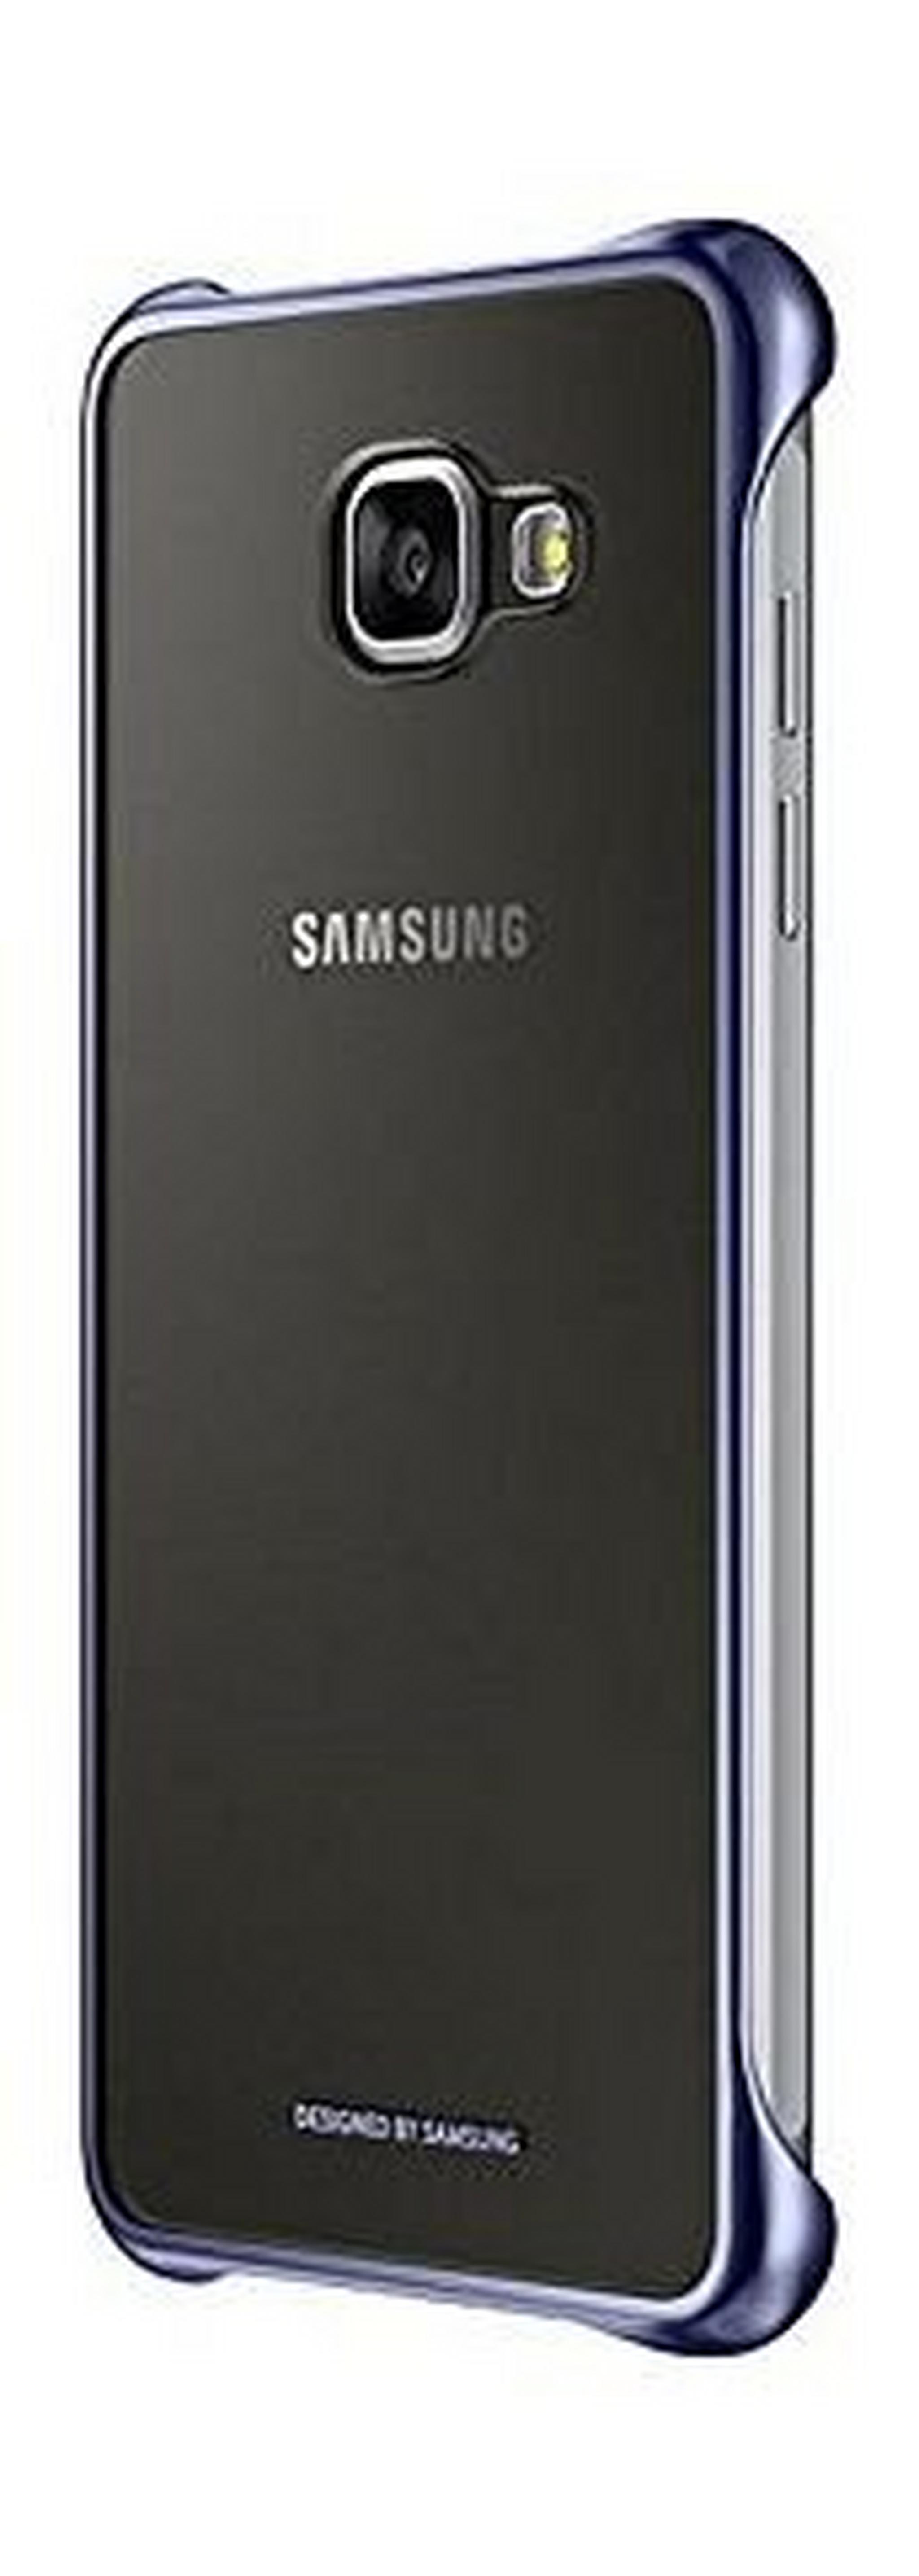 Samsung Protective Clear Cover for Galaxy A7 - Black